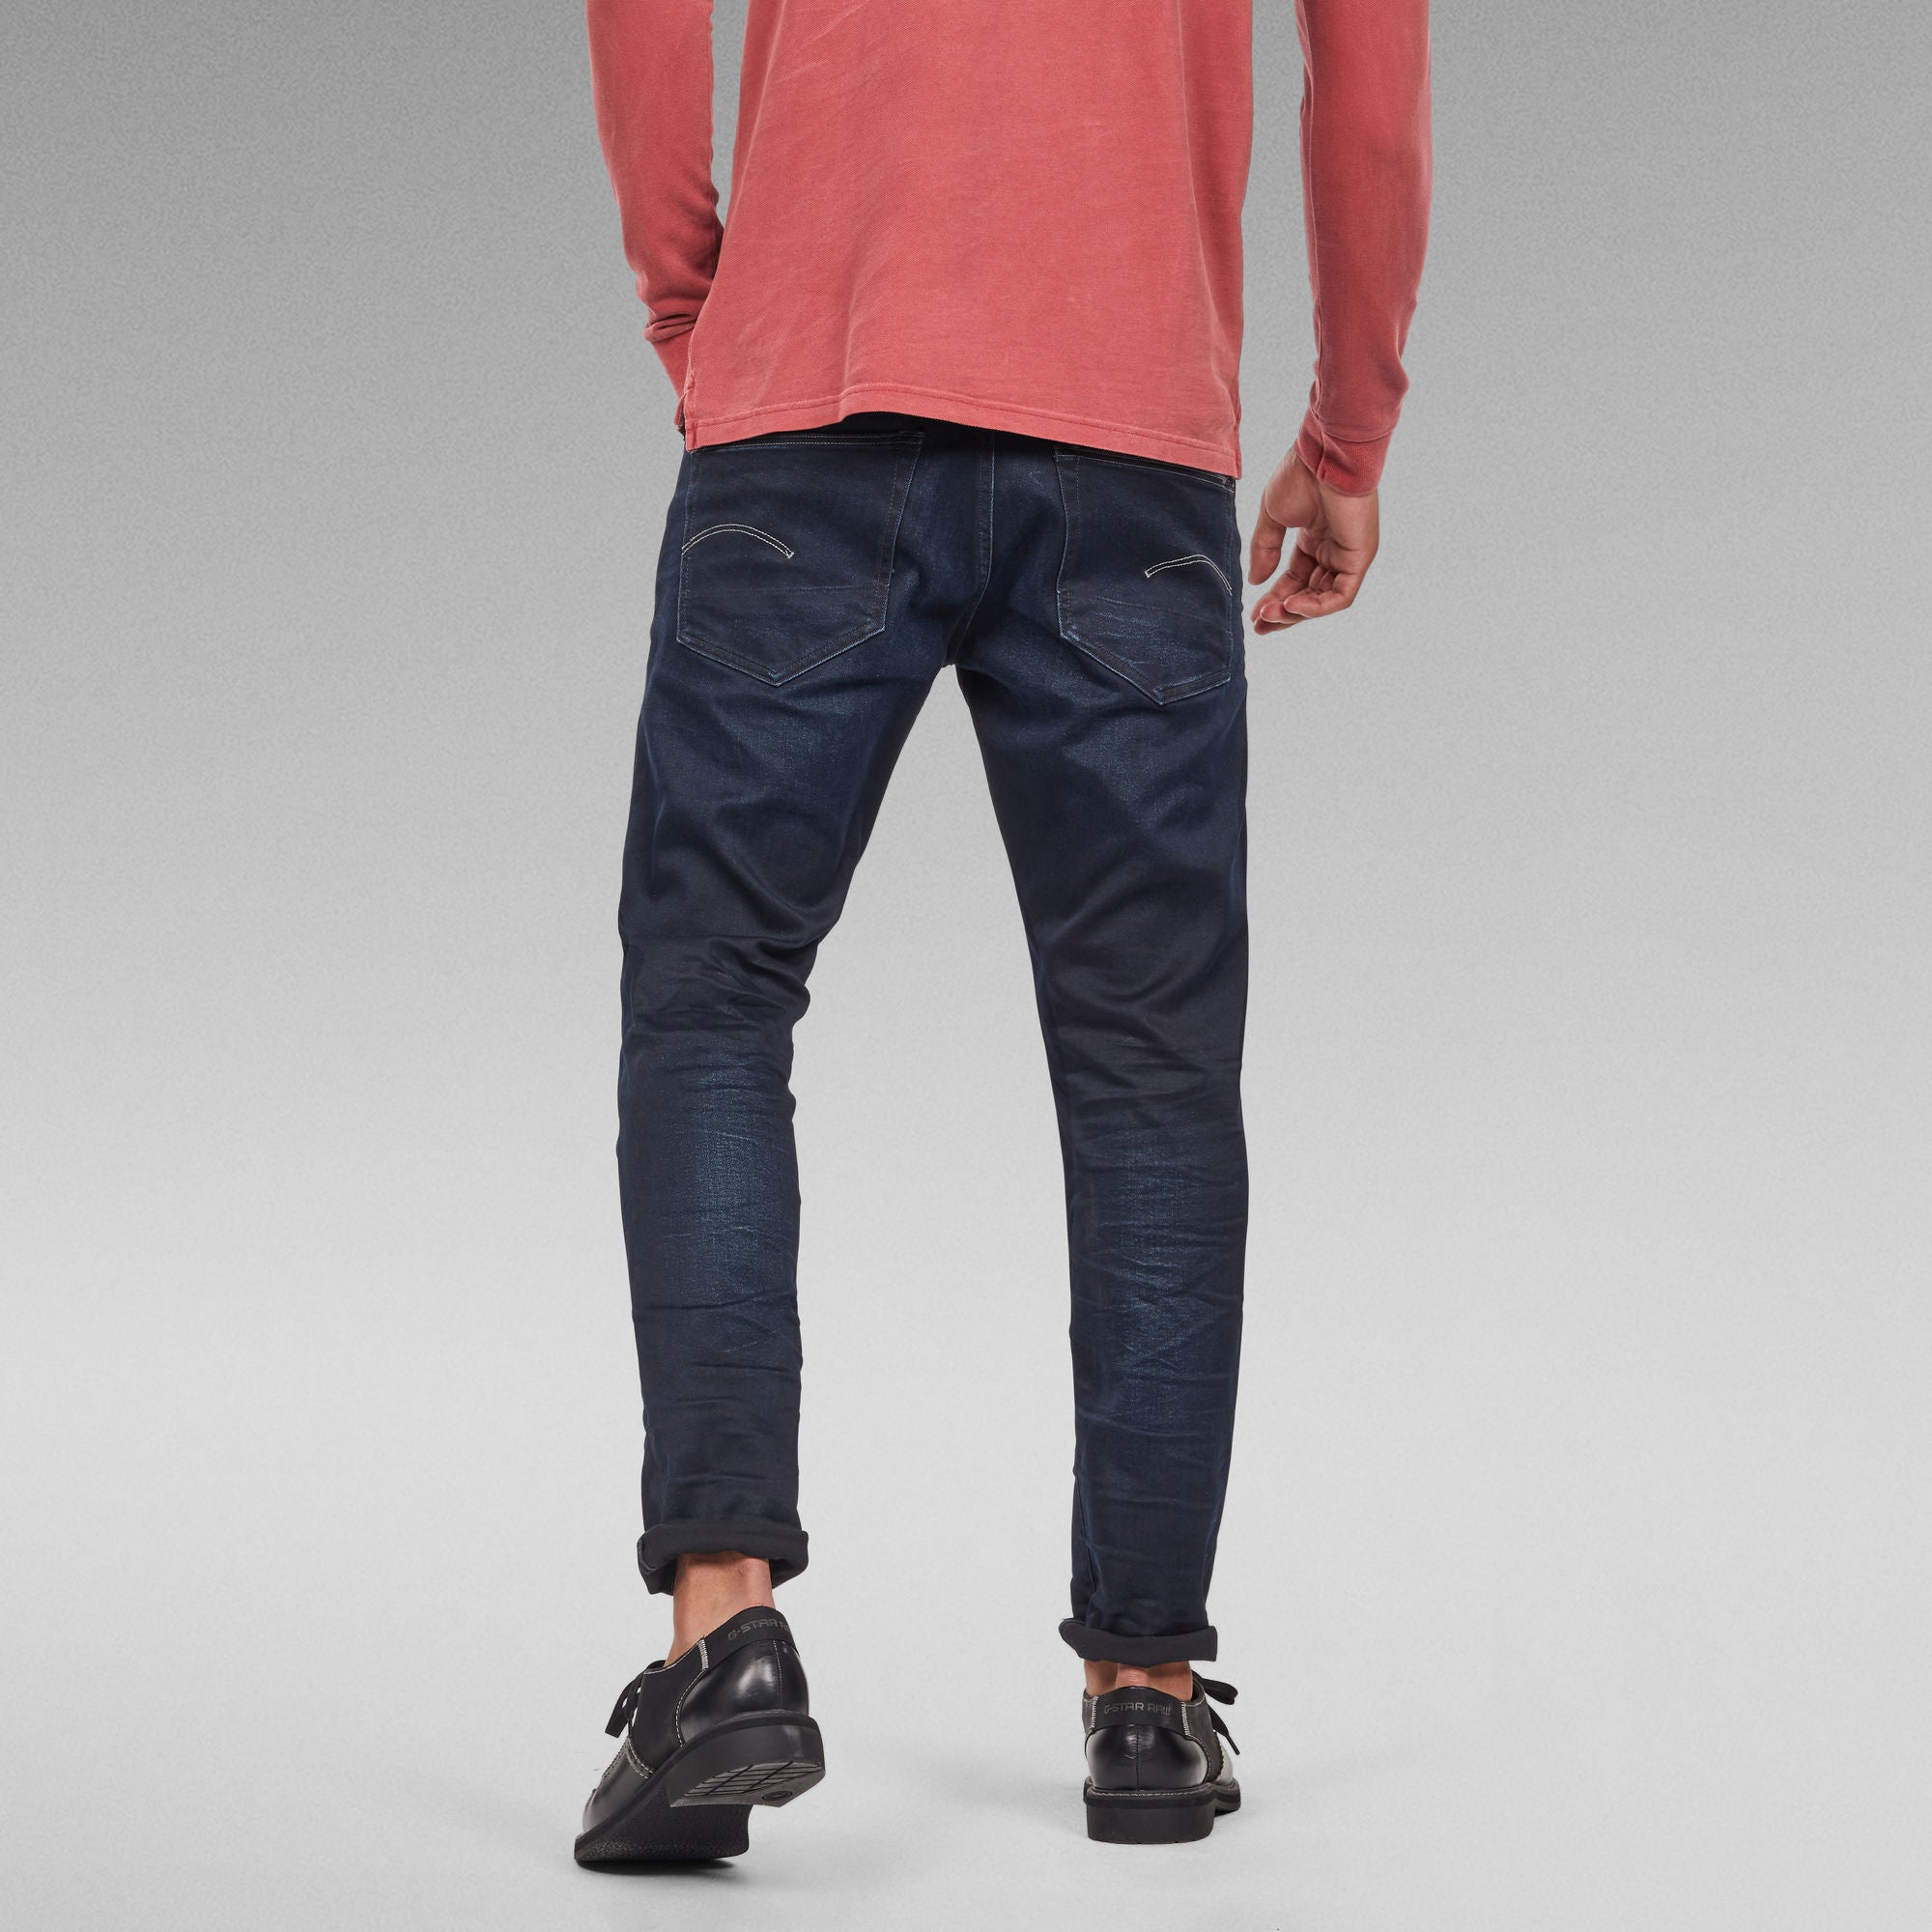 G-Star Raw - 3301 Straight Tapered Jeans - Dk Aged 70%